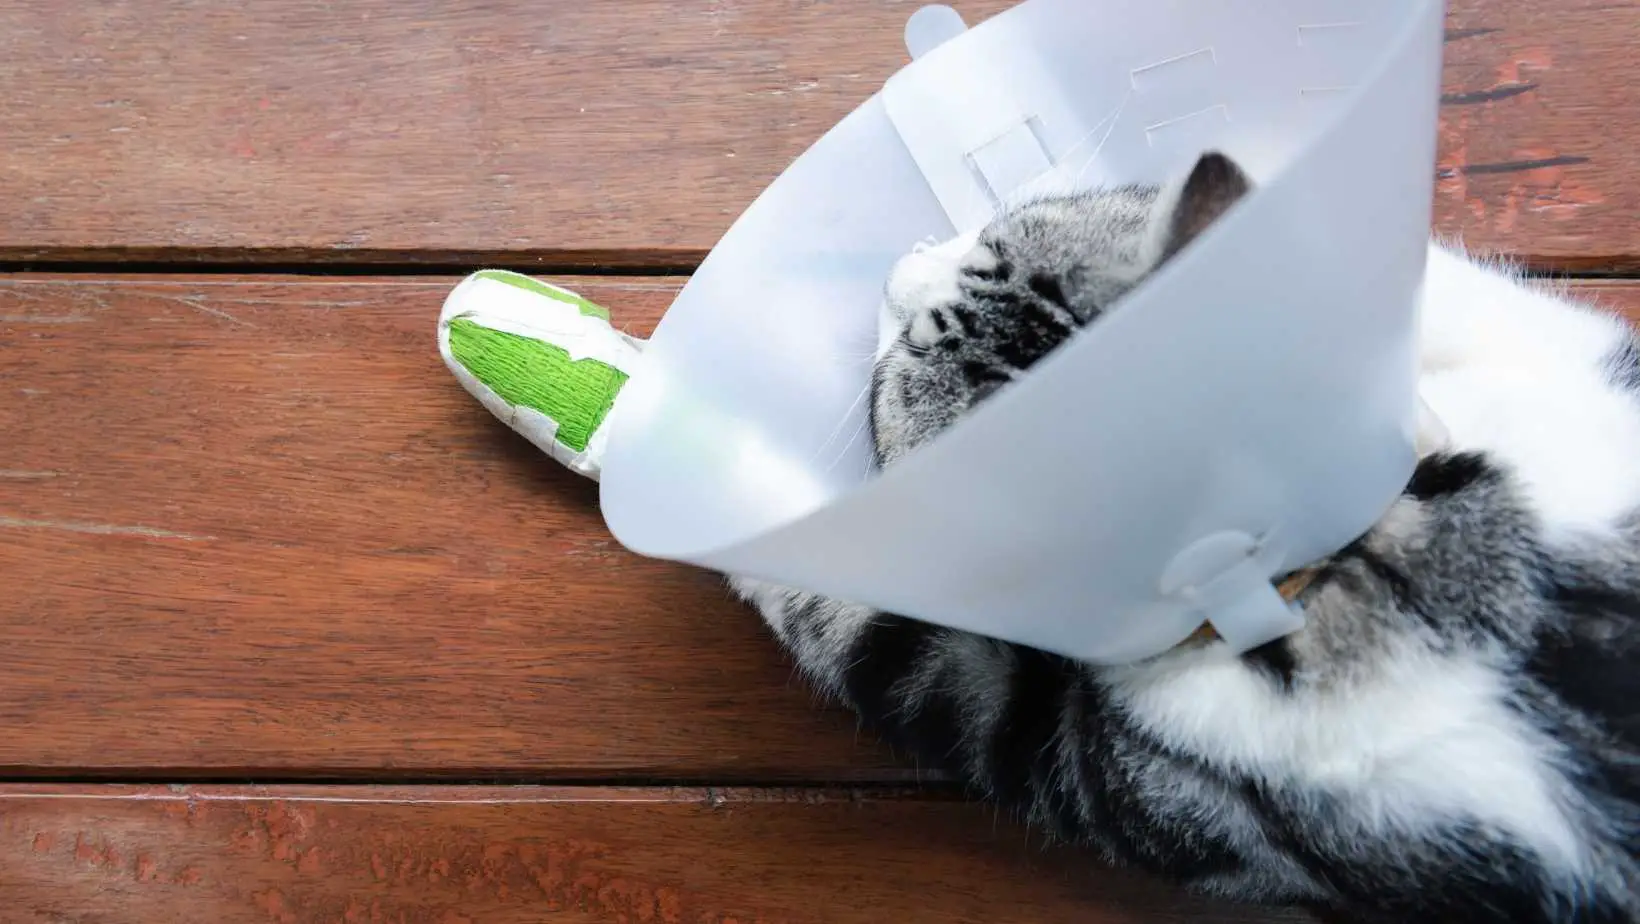 How to Treat a Cat Broken Leg at Home?